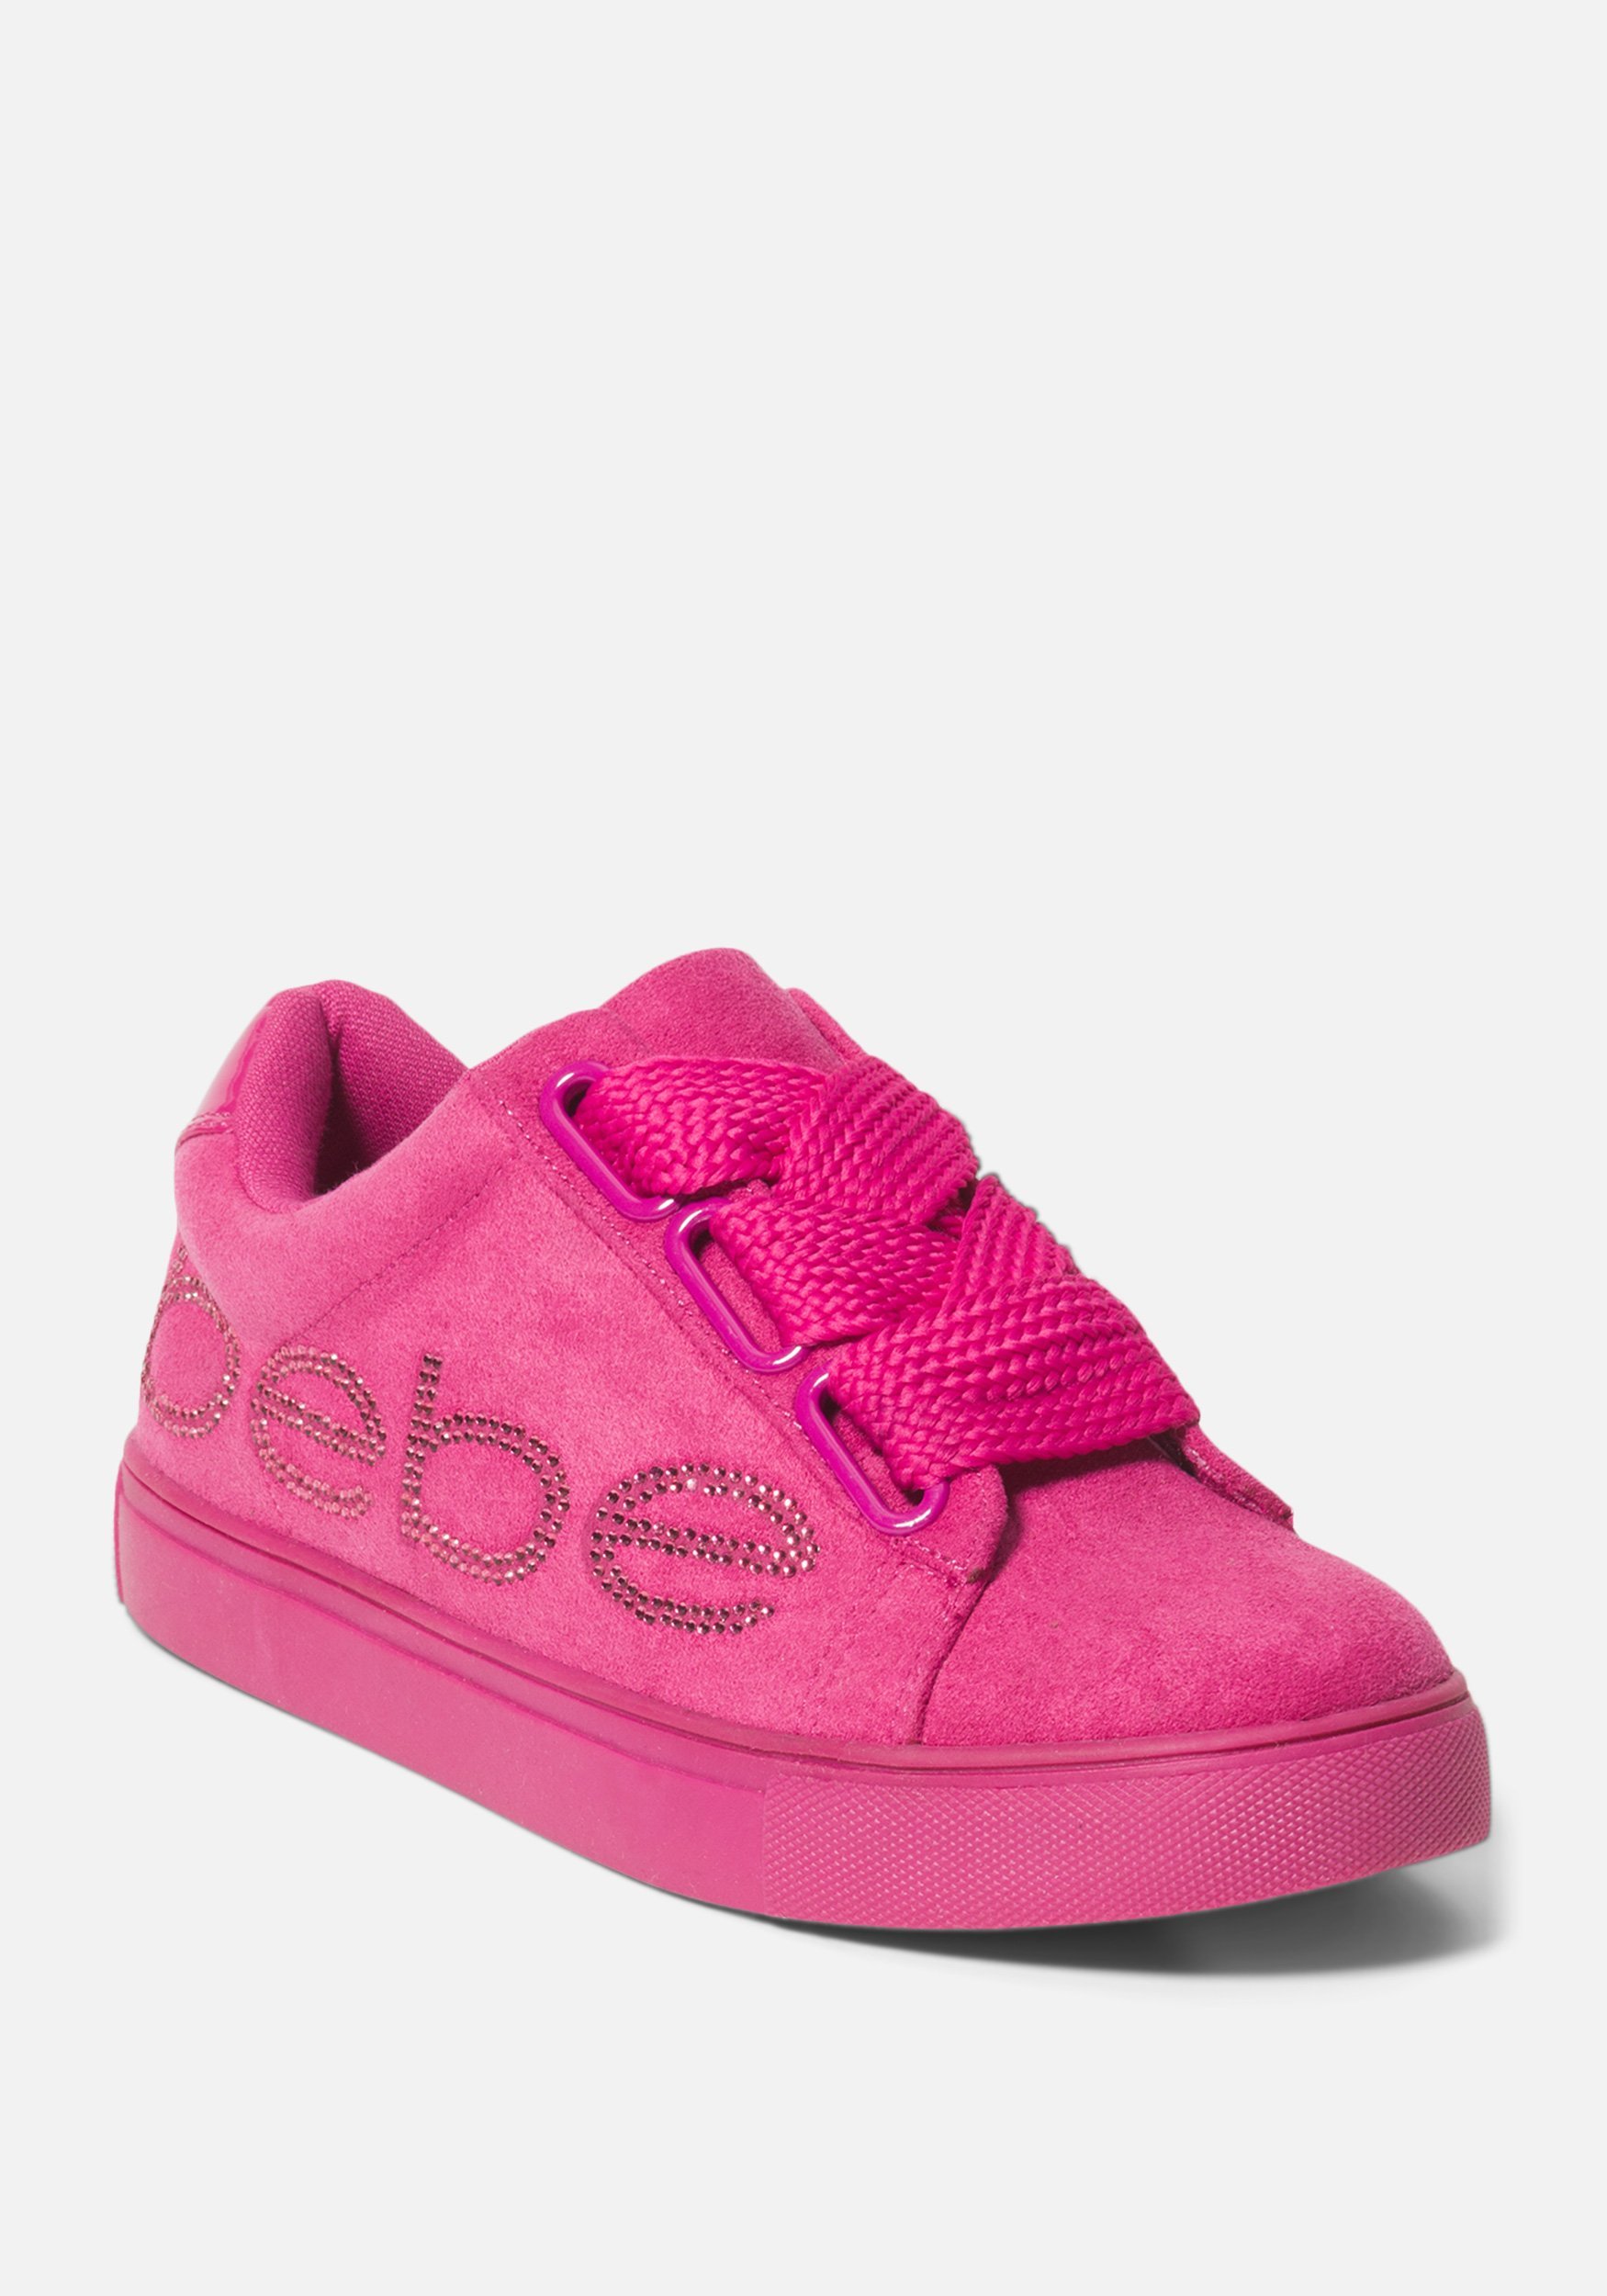 Women's Cabree Bebe Logo Sneakers, Size 9 in Hot Pink Synthetic